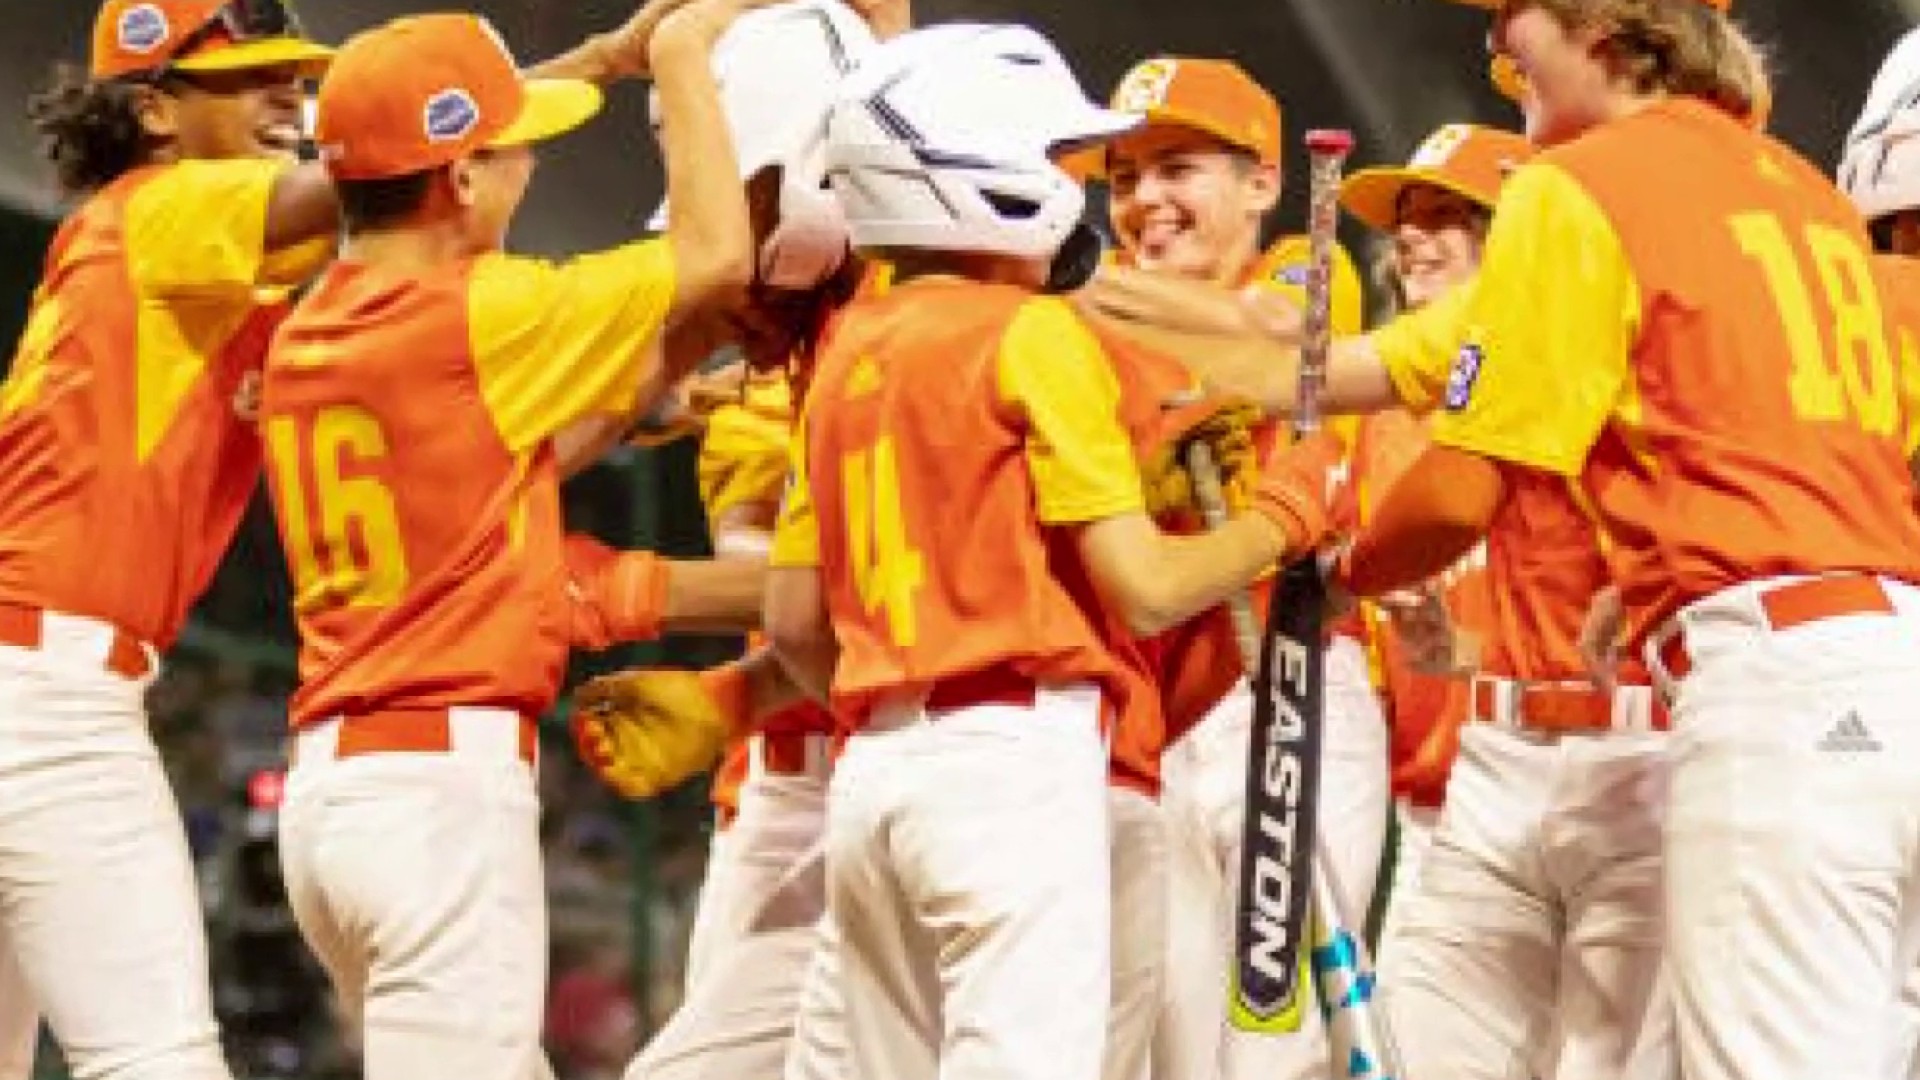 Pearland loses at Little League World Series